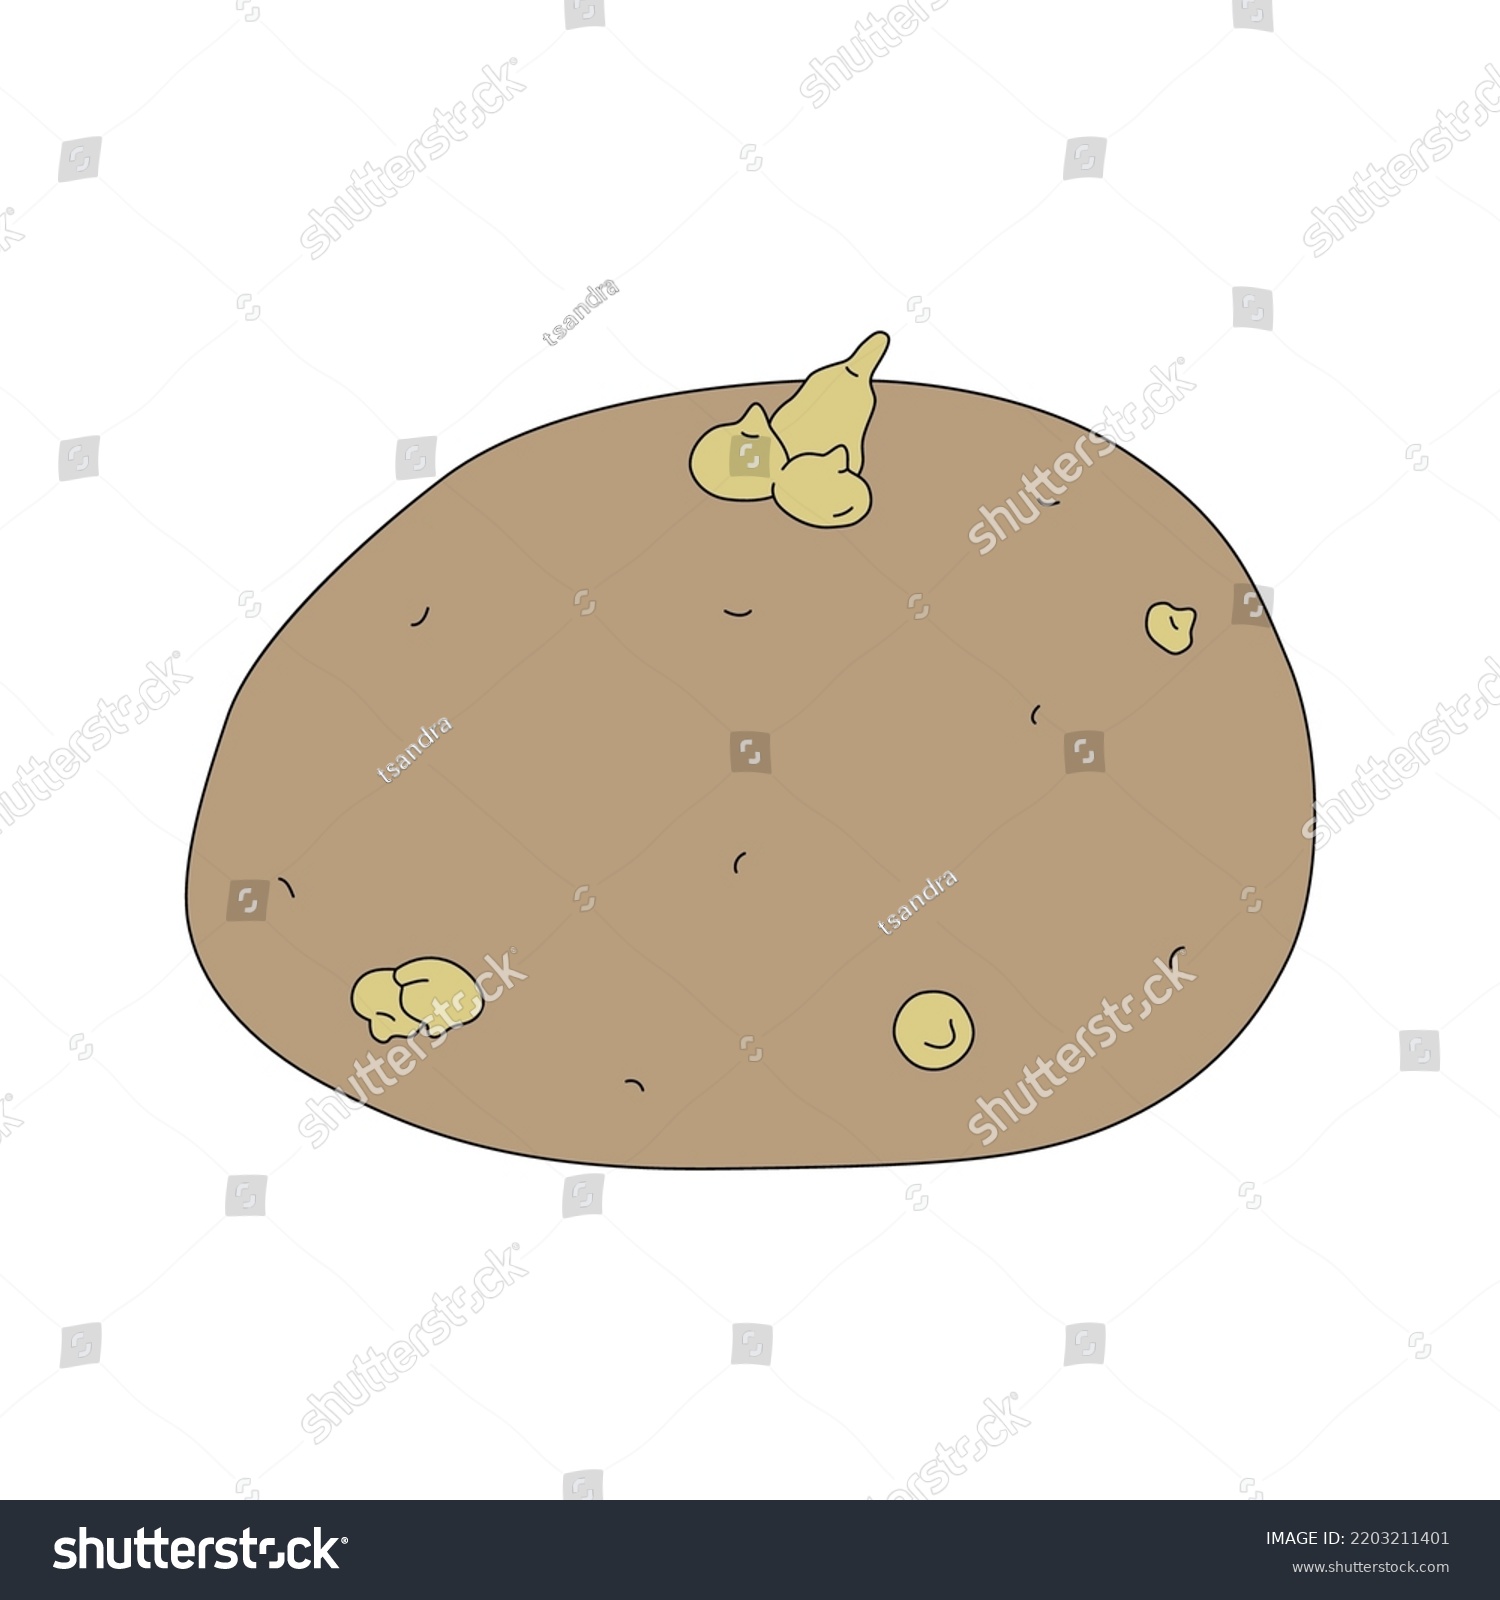 SVG of Vector illustration of potato with sprouts isolated on white background. Ripe fresh vegetable in cartoon style svg